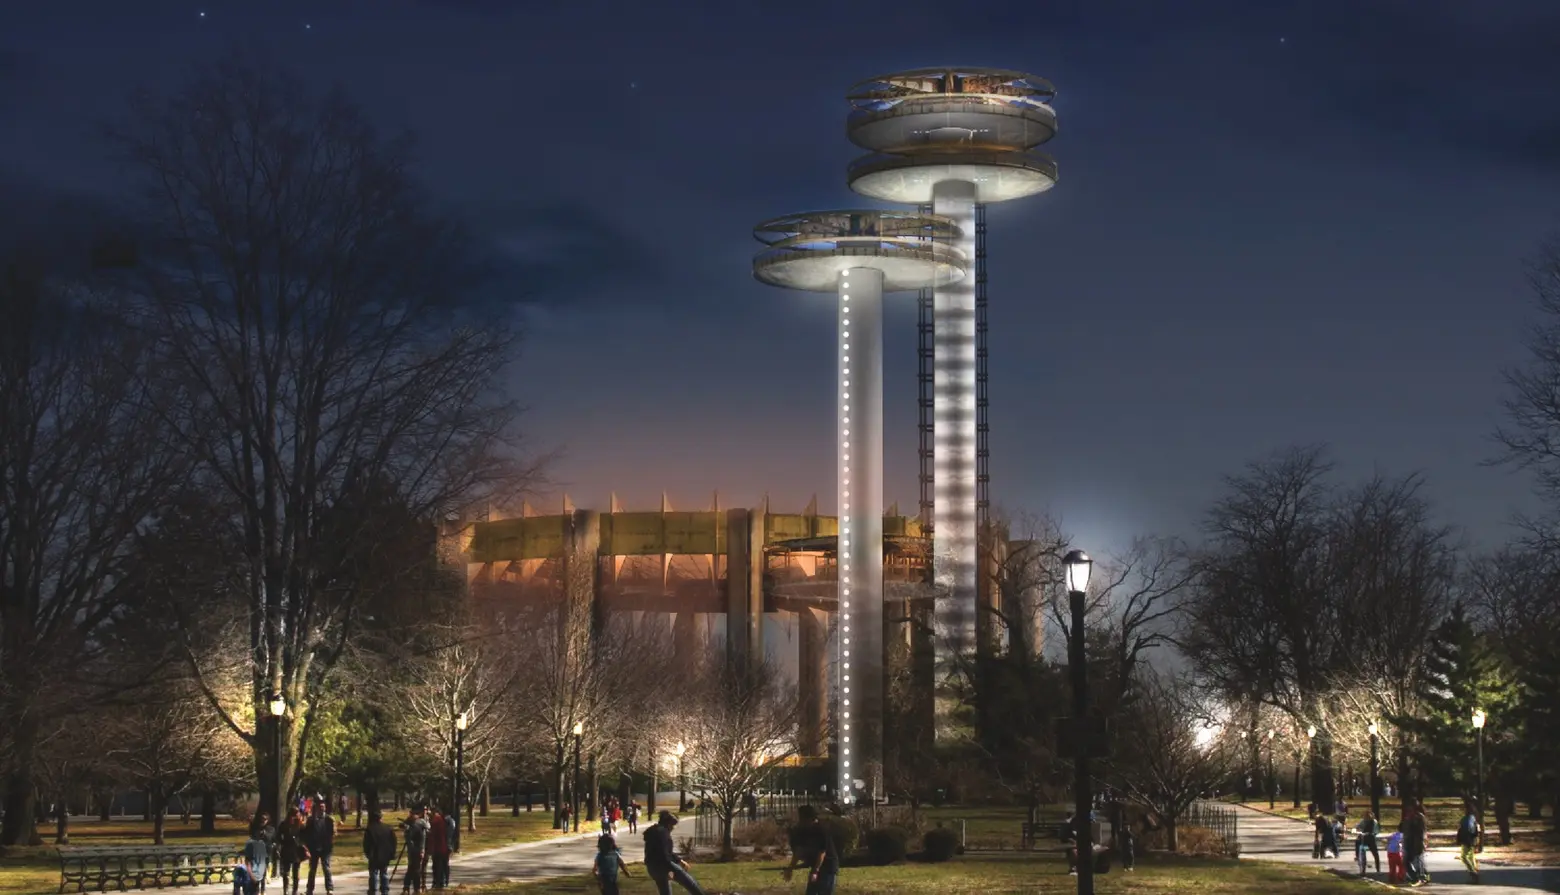 NYC Parks breaks ground on $24M project to restore Philip Johnson’s 1964 World’s Fair Pavilion